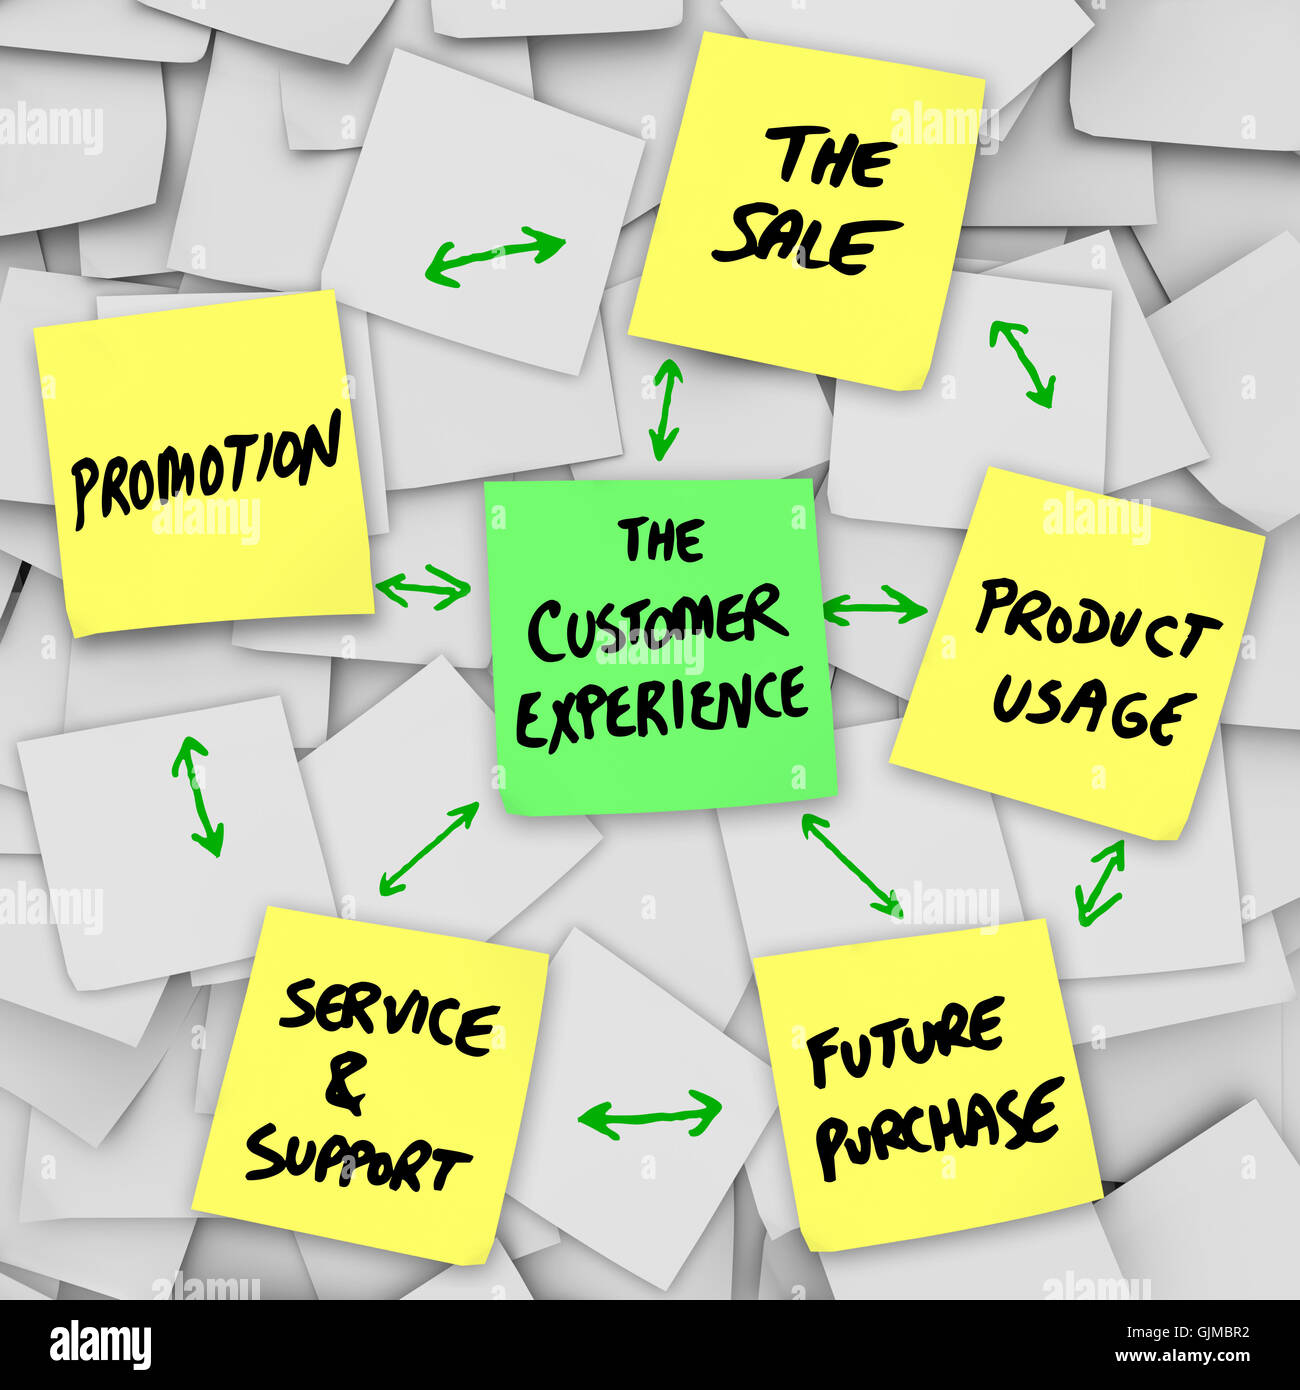 The Customer Experience from Sale to Product Service Support Stock Photo